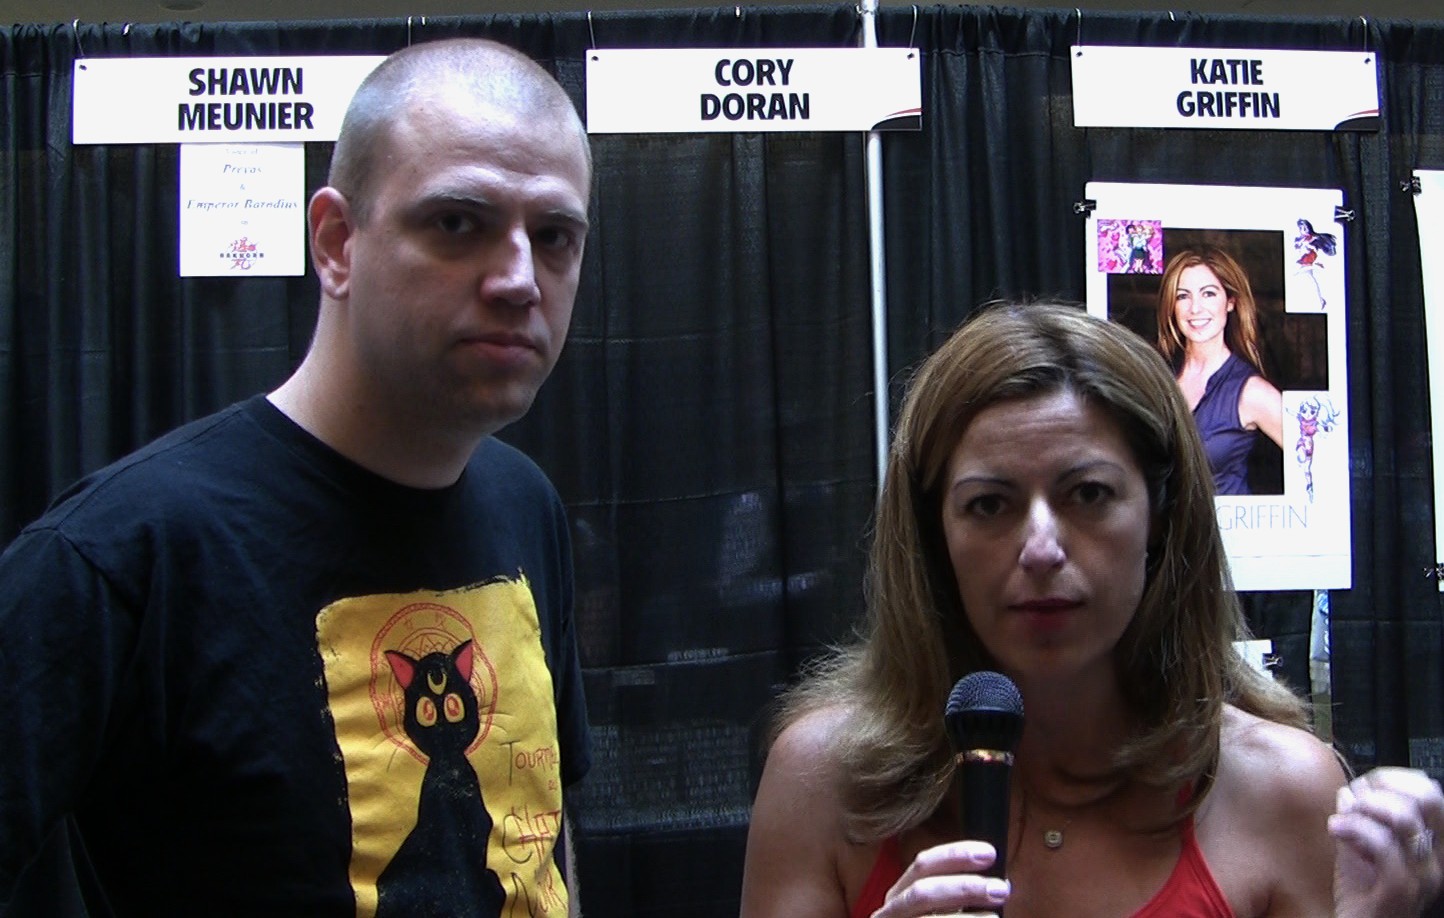 Interview with Katie Griffin, voice of Sailor Mars at Fan Expo